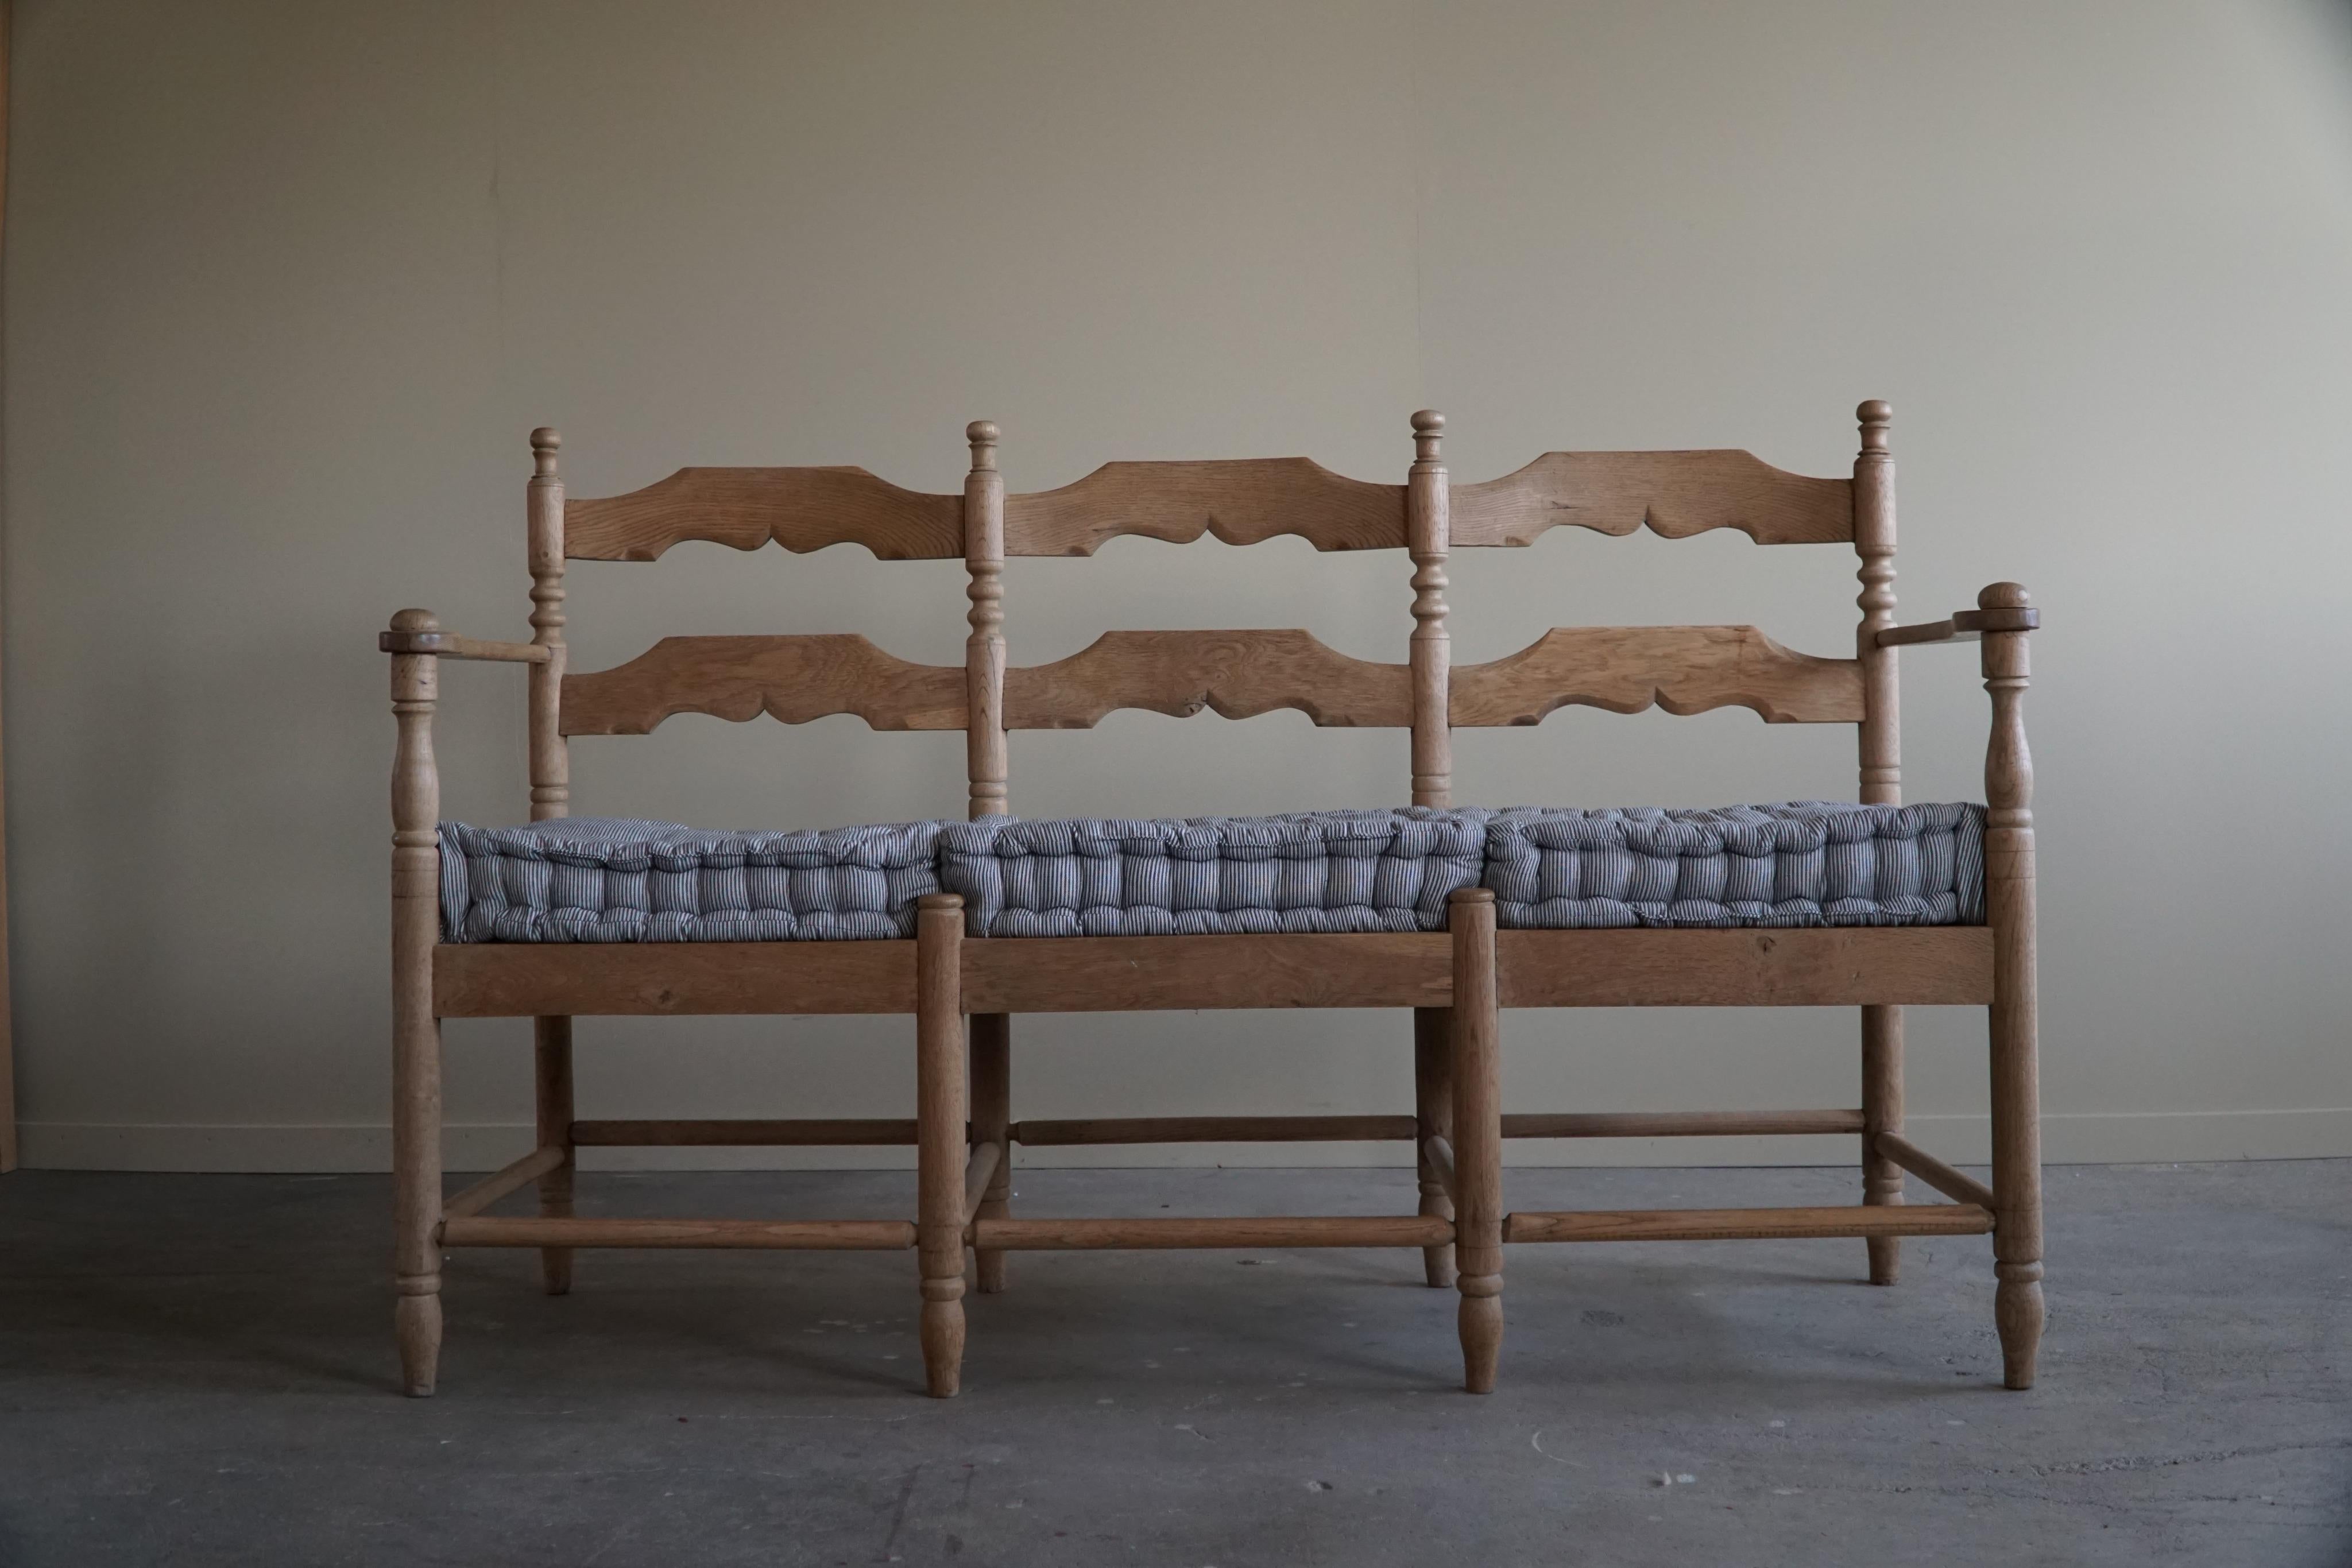 Hand-Crafted Danish Modern, Sculptural Three Seater Sofa / Bench, Made by Hans Dau, 1950s For Sale